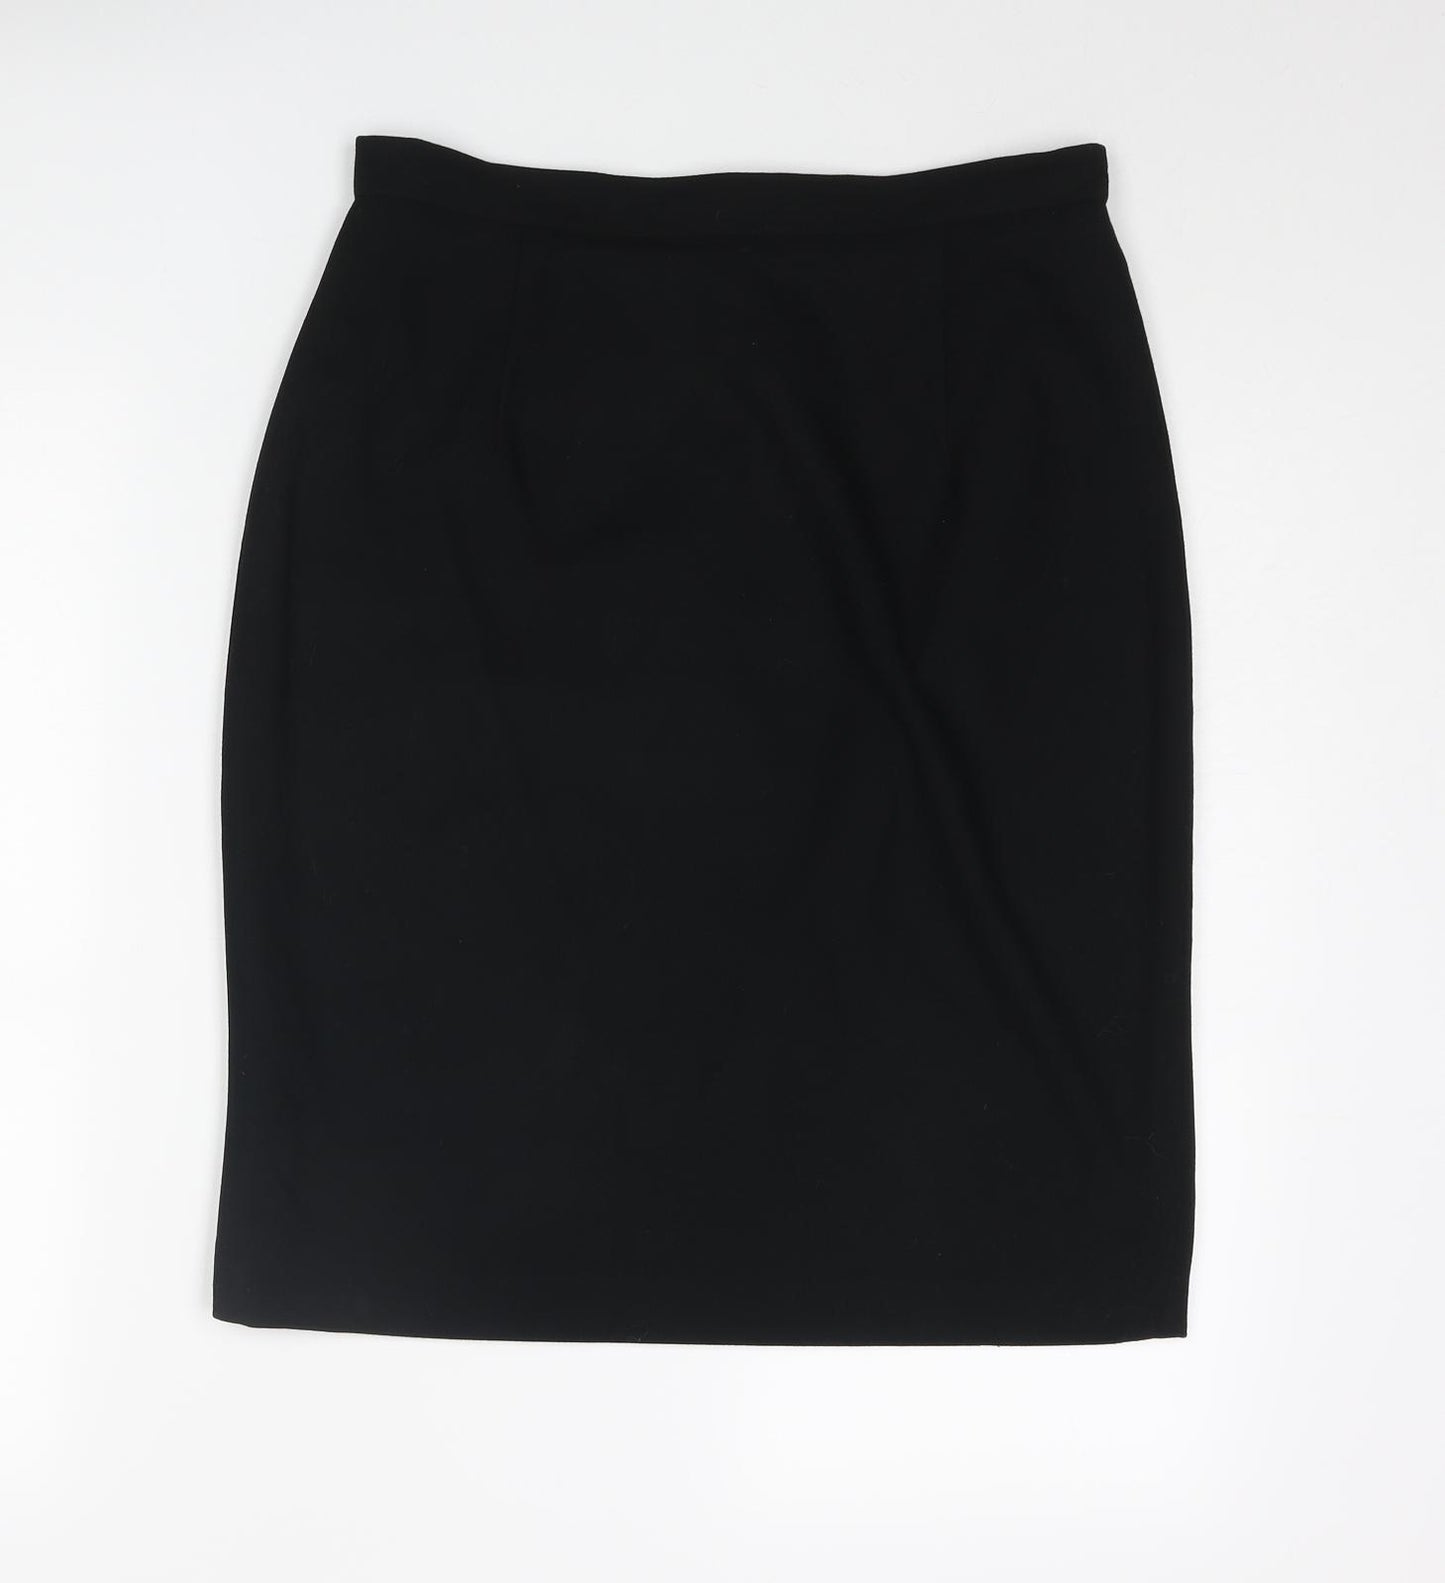 Principles Womens Black Polyester A-Line Skirt Size 12 Zip